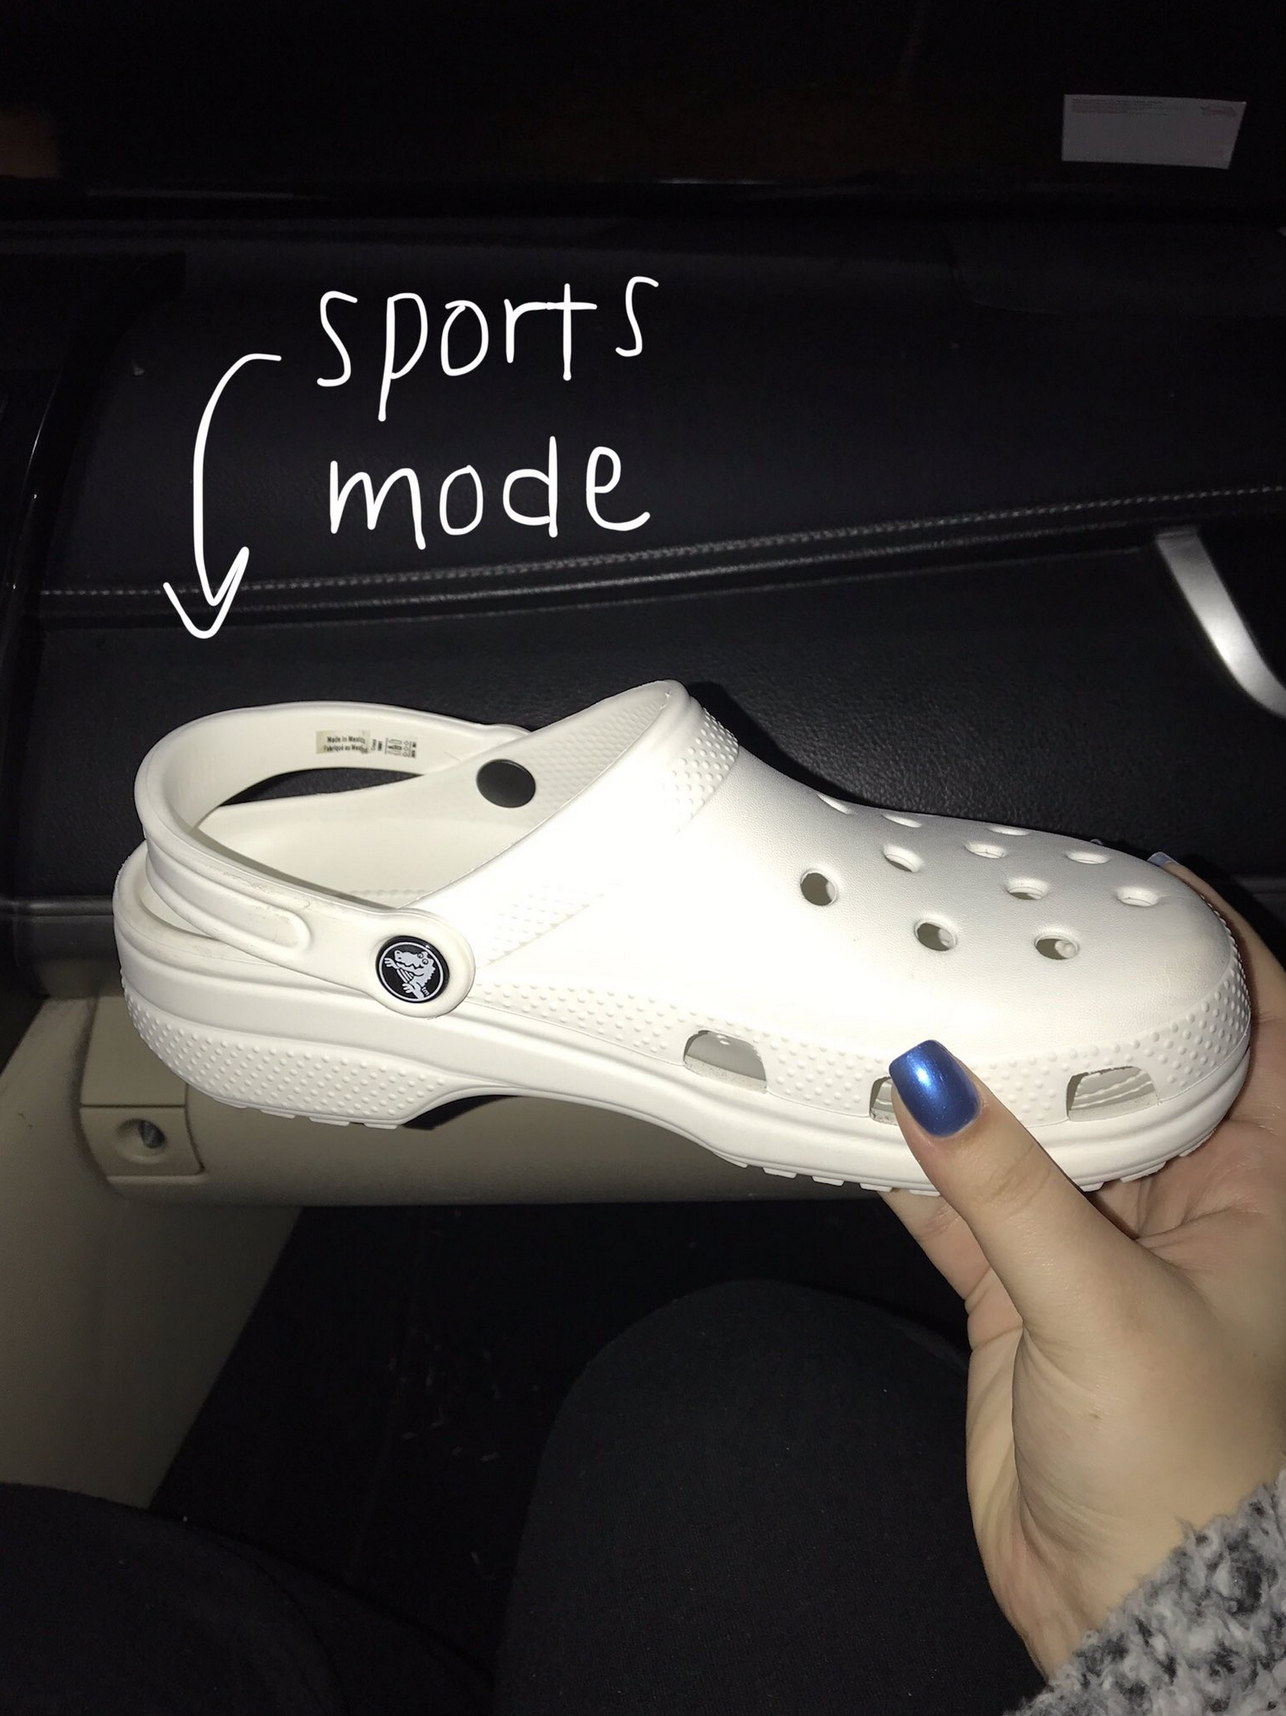 what are the things you put on crocs called